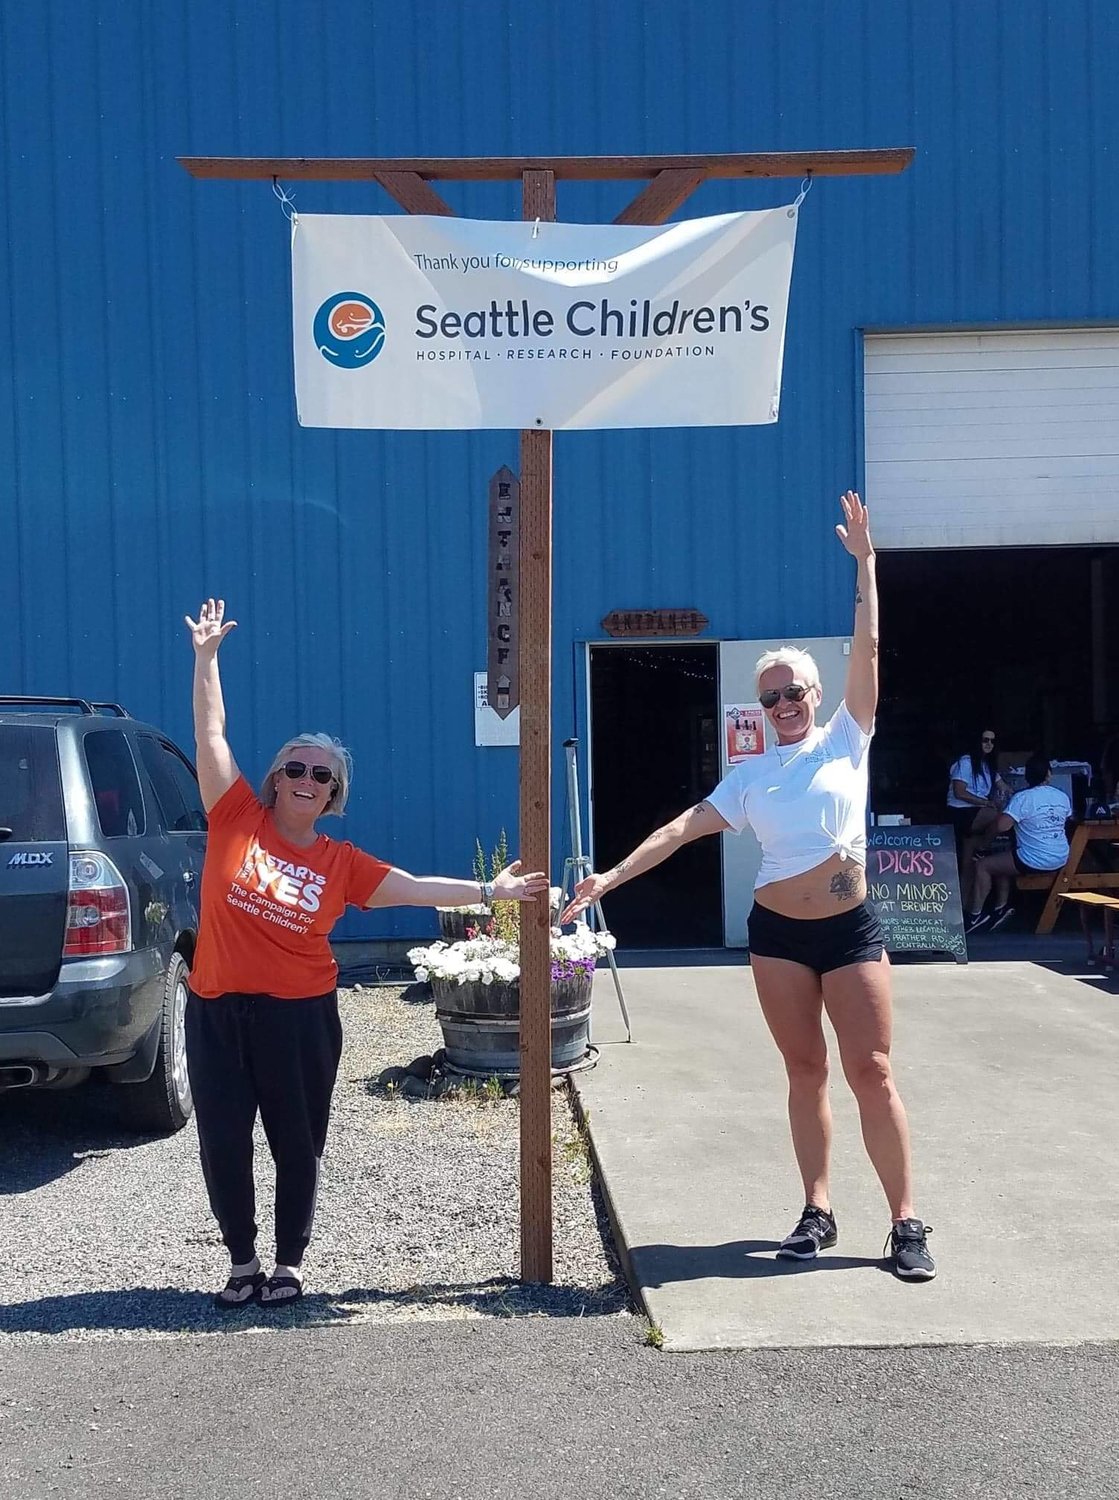 A pair of Adaline Coffman Guild members show their support for Seattle Children’s Hospital during a fundraiser.